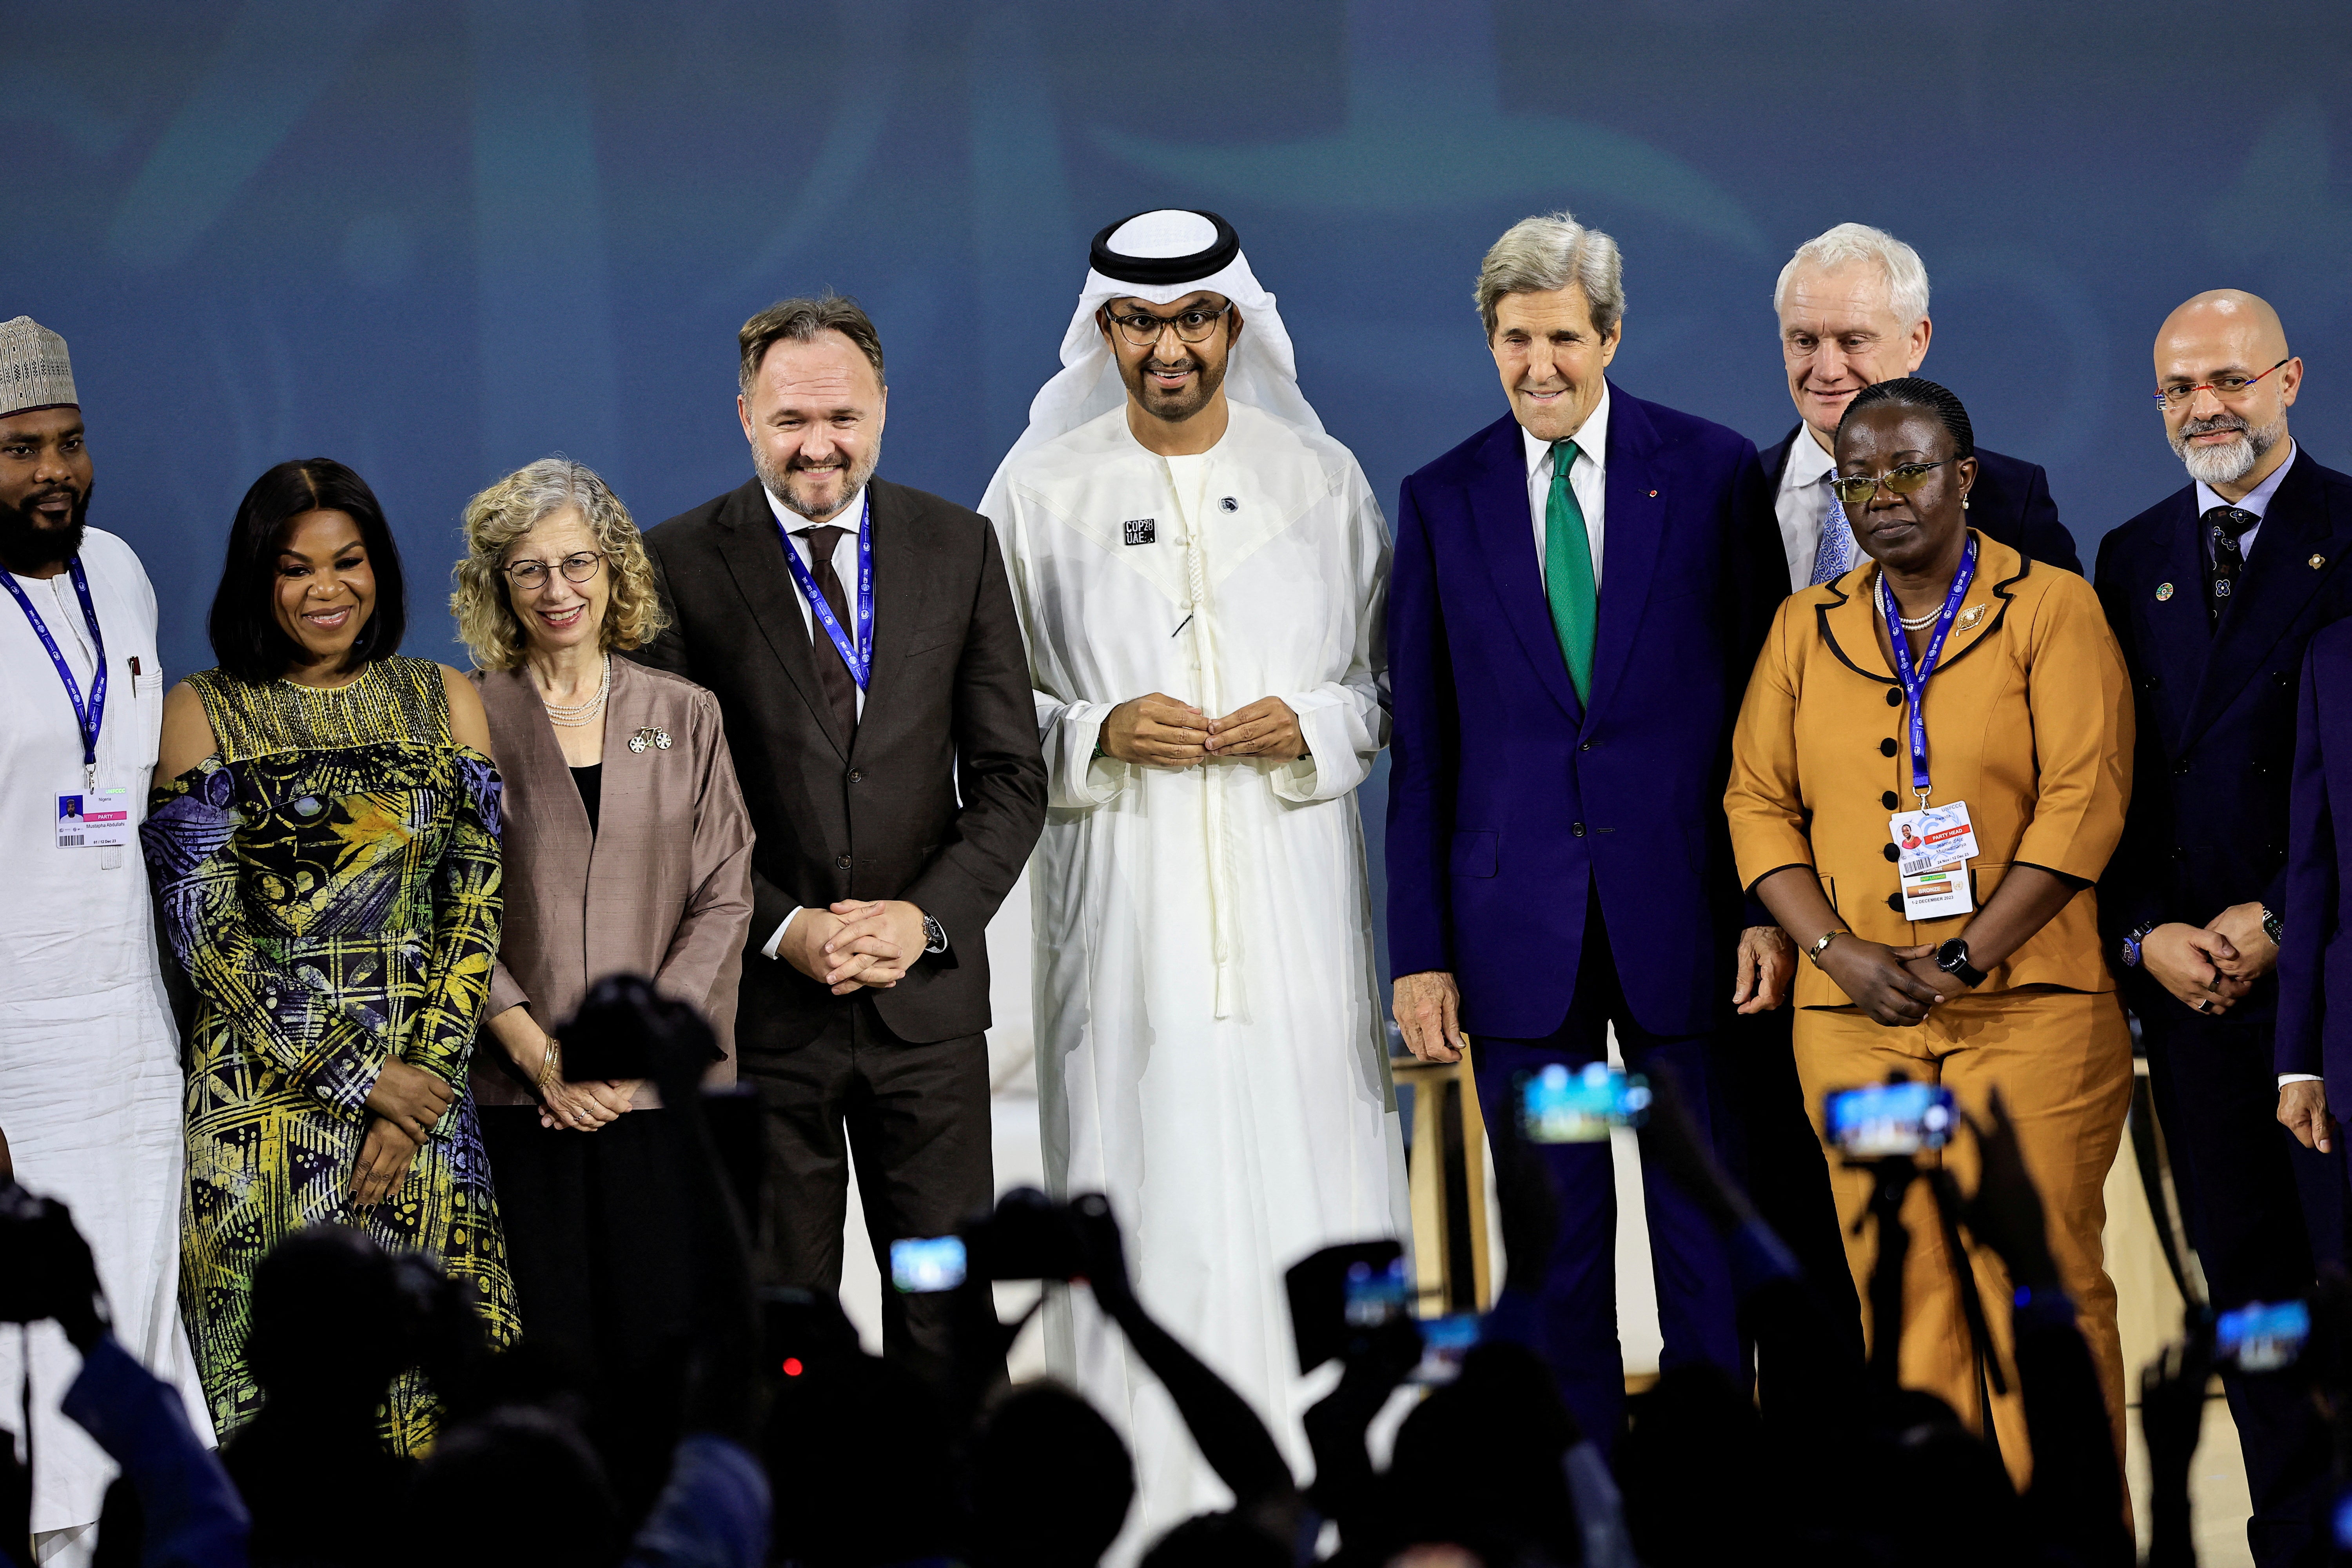 Cop28 president Sultan Ahmed al-Jaber and US climate envoy John Kerry join other officials at the Global Cooling Pledge on Tuesday